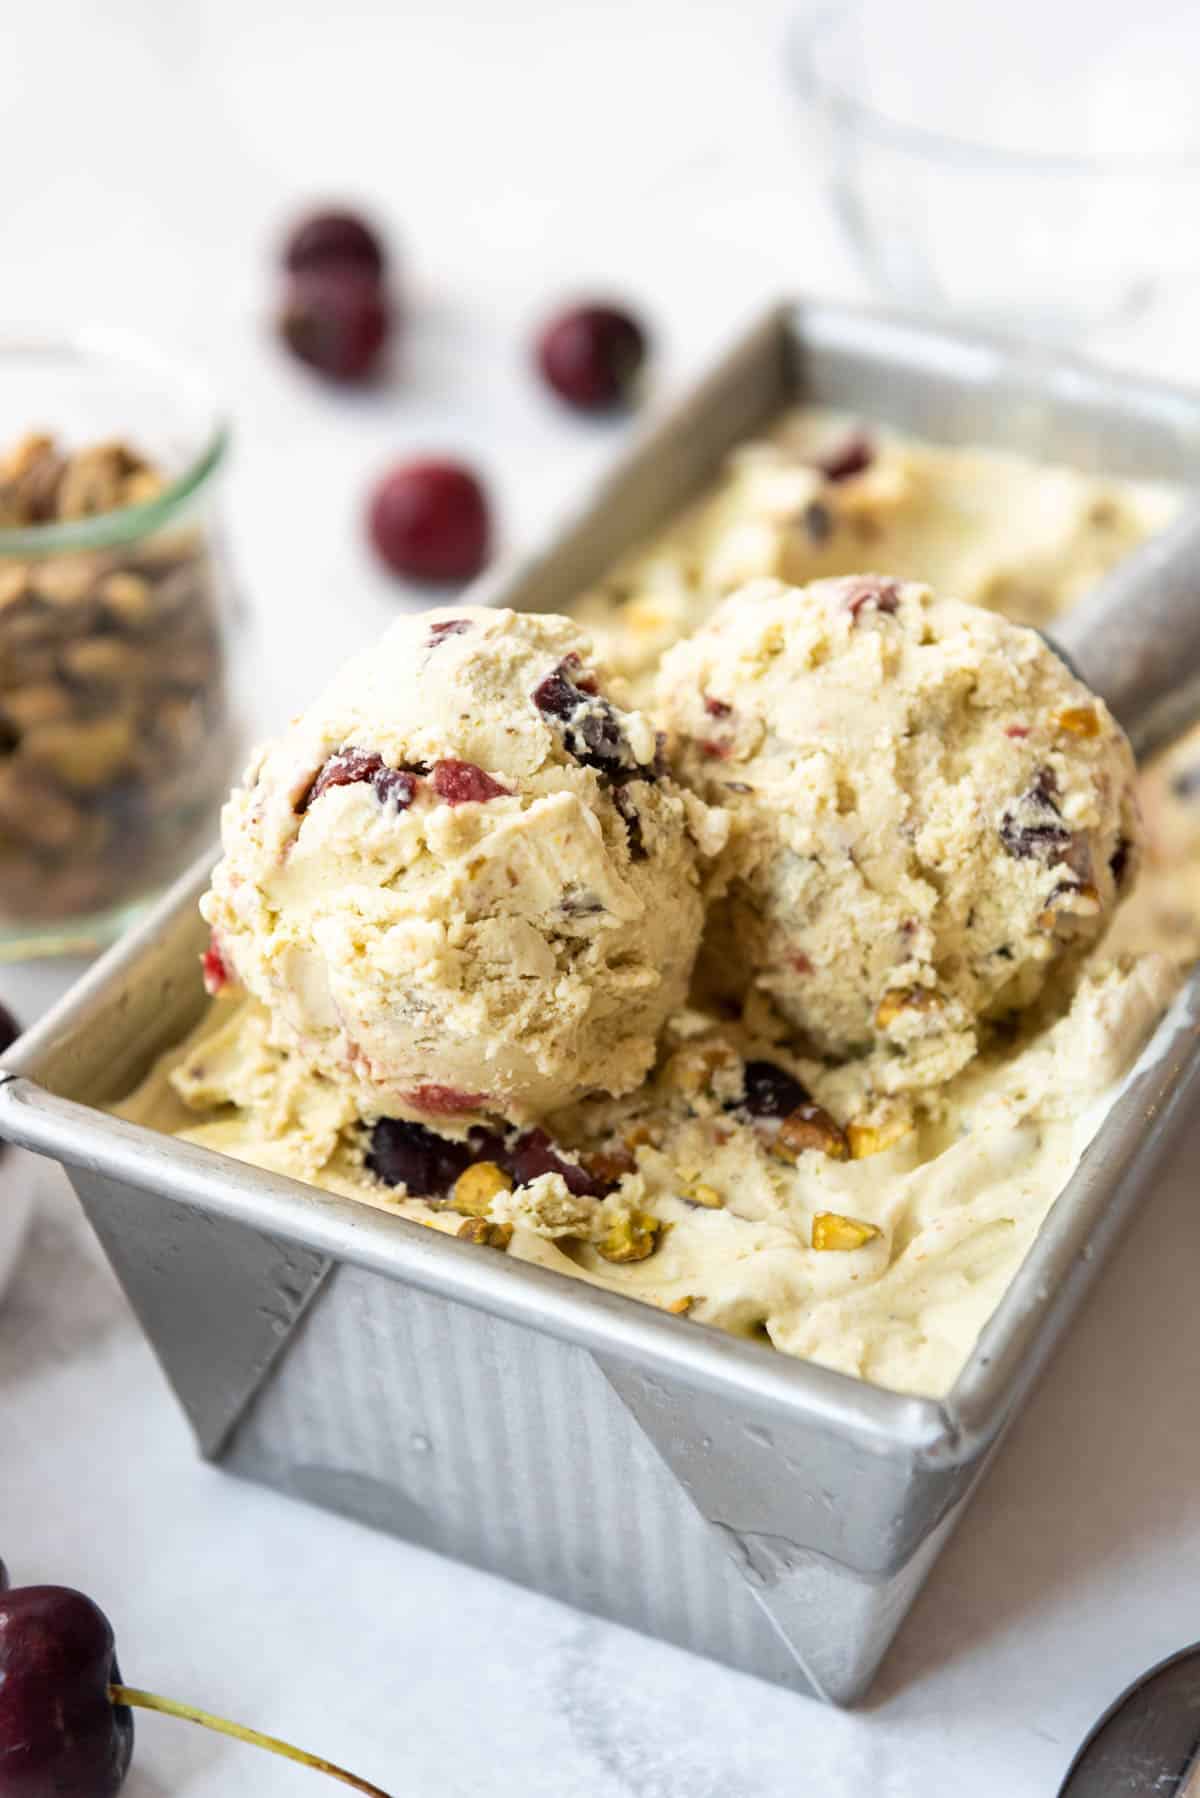 Scoops of cherry pistachio ice cream in a bread pan with cherries and pistachios nearby.